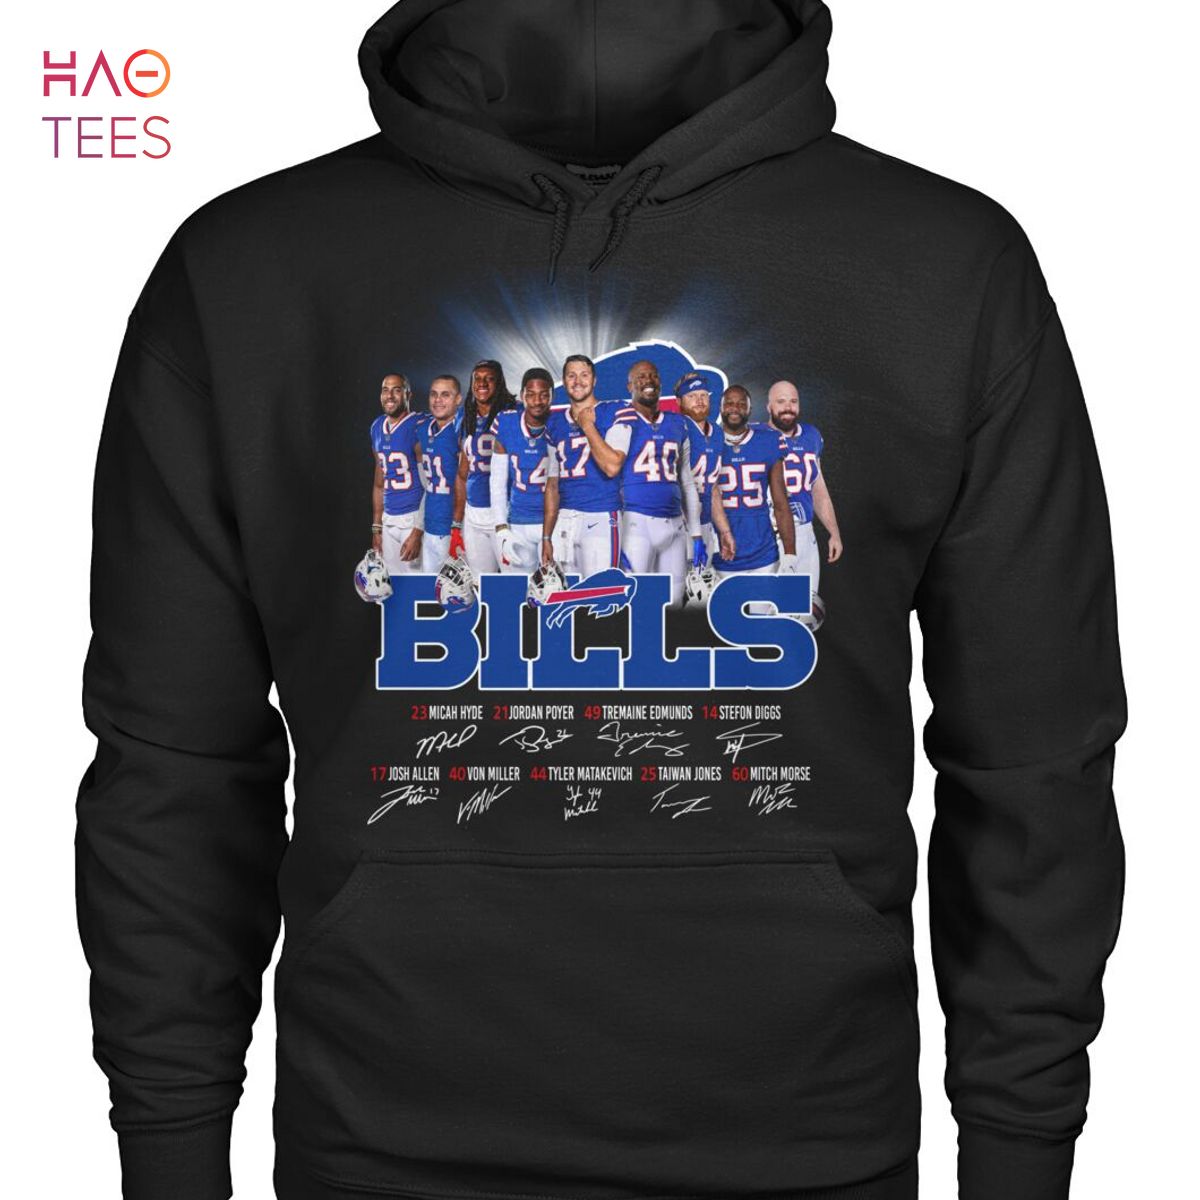 THE BEST Bills Shirt Limited Edition